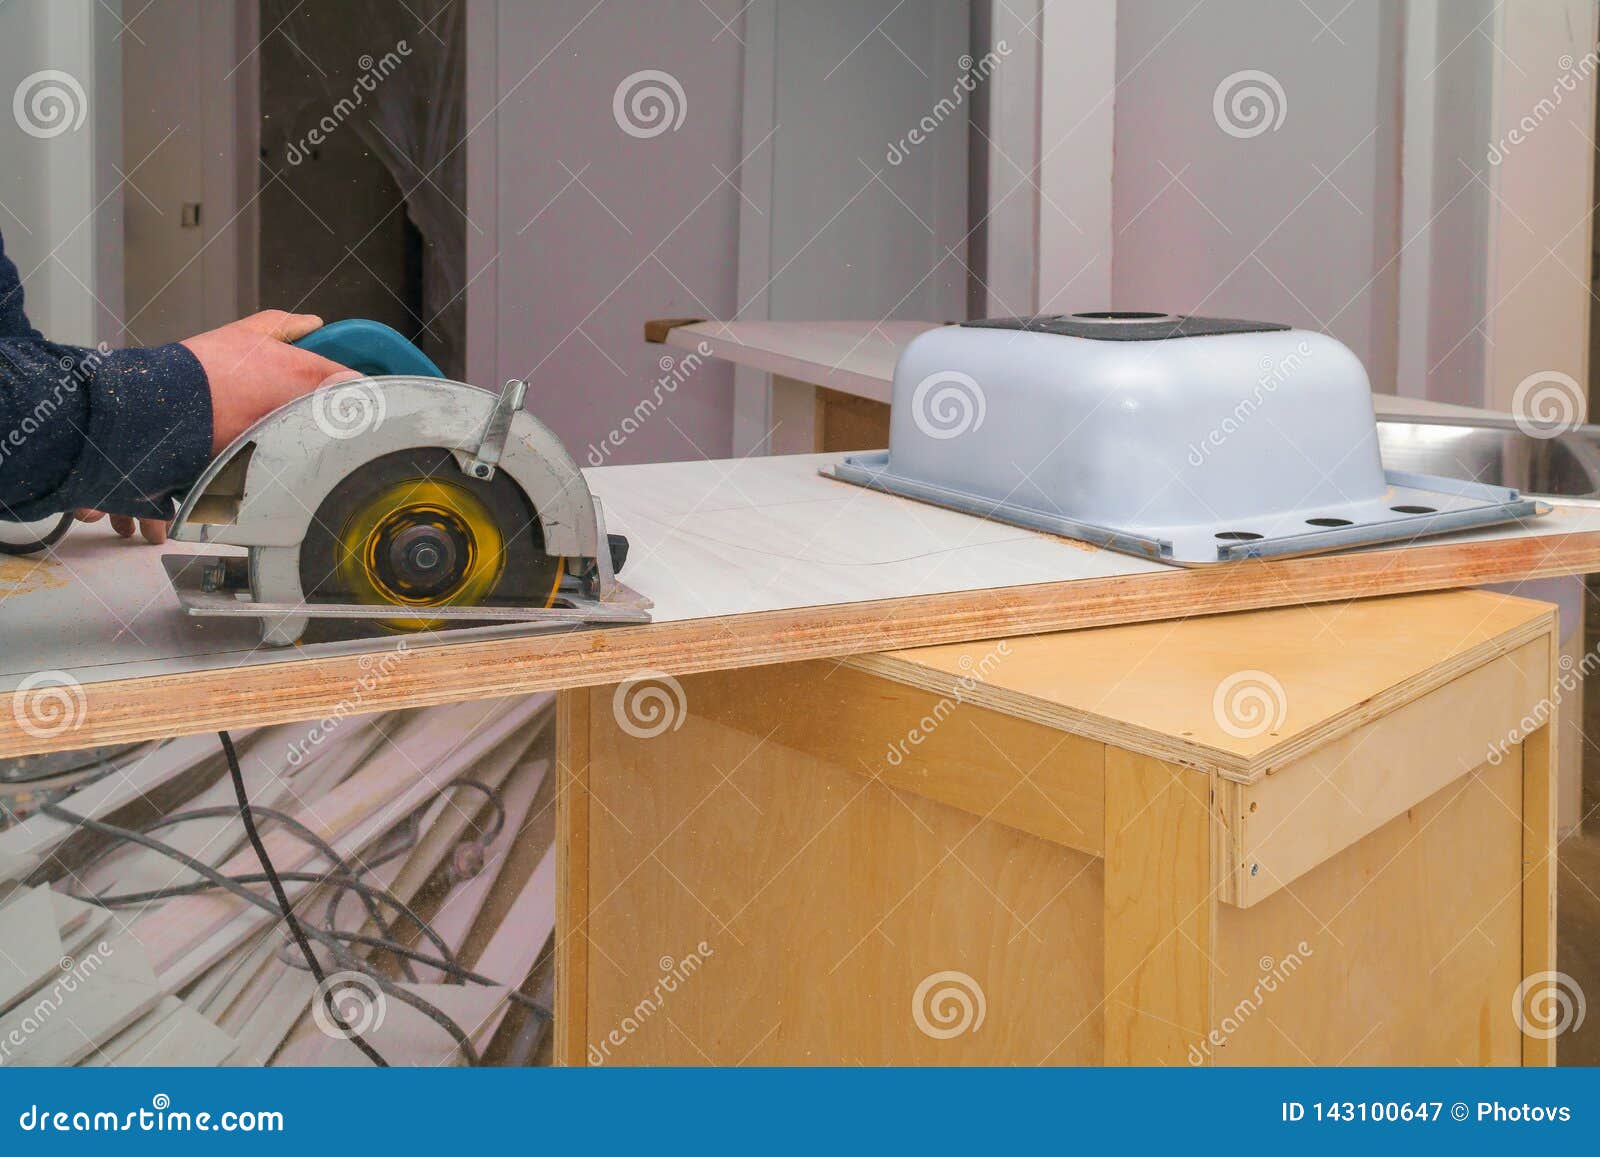 contractor installing sink cut hole laminate counter top carpenter installing remodeling cut hole laminate counter 143100647